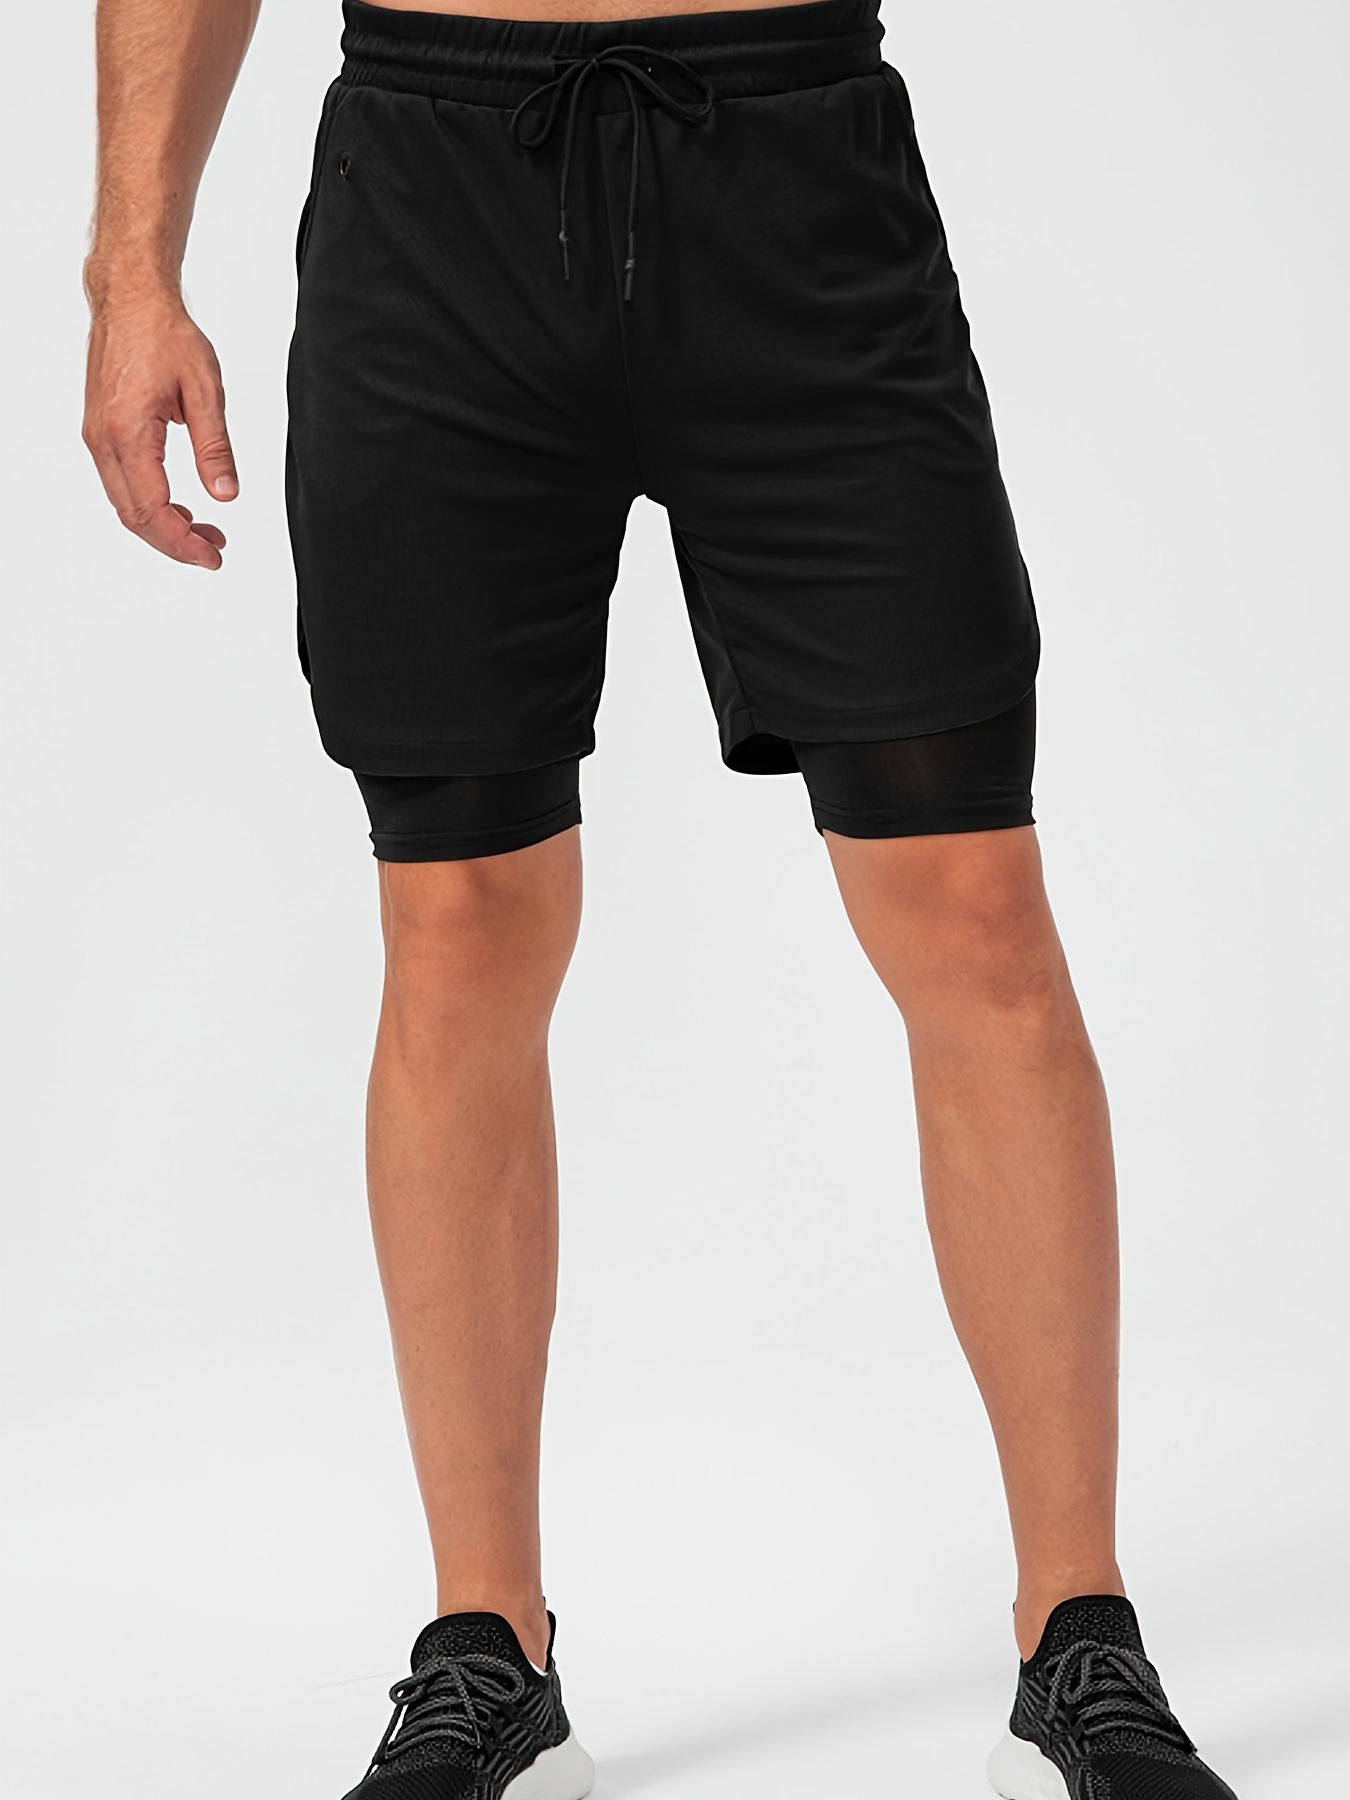 Men's New Style Sports Shorts, Double-Layered Imitation Two-In-One